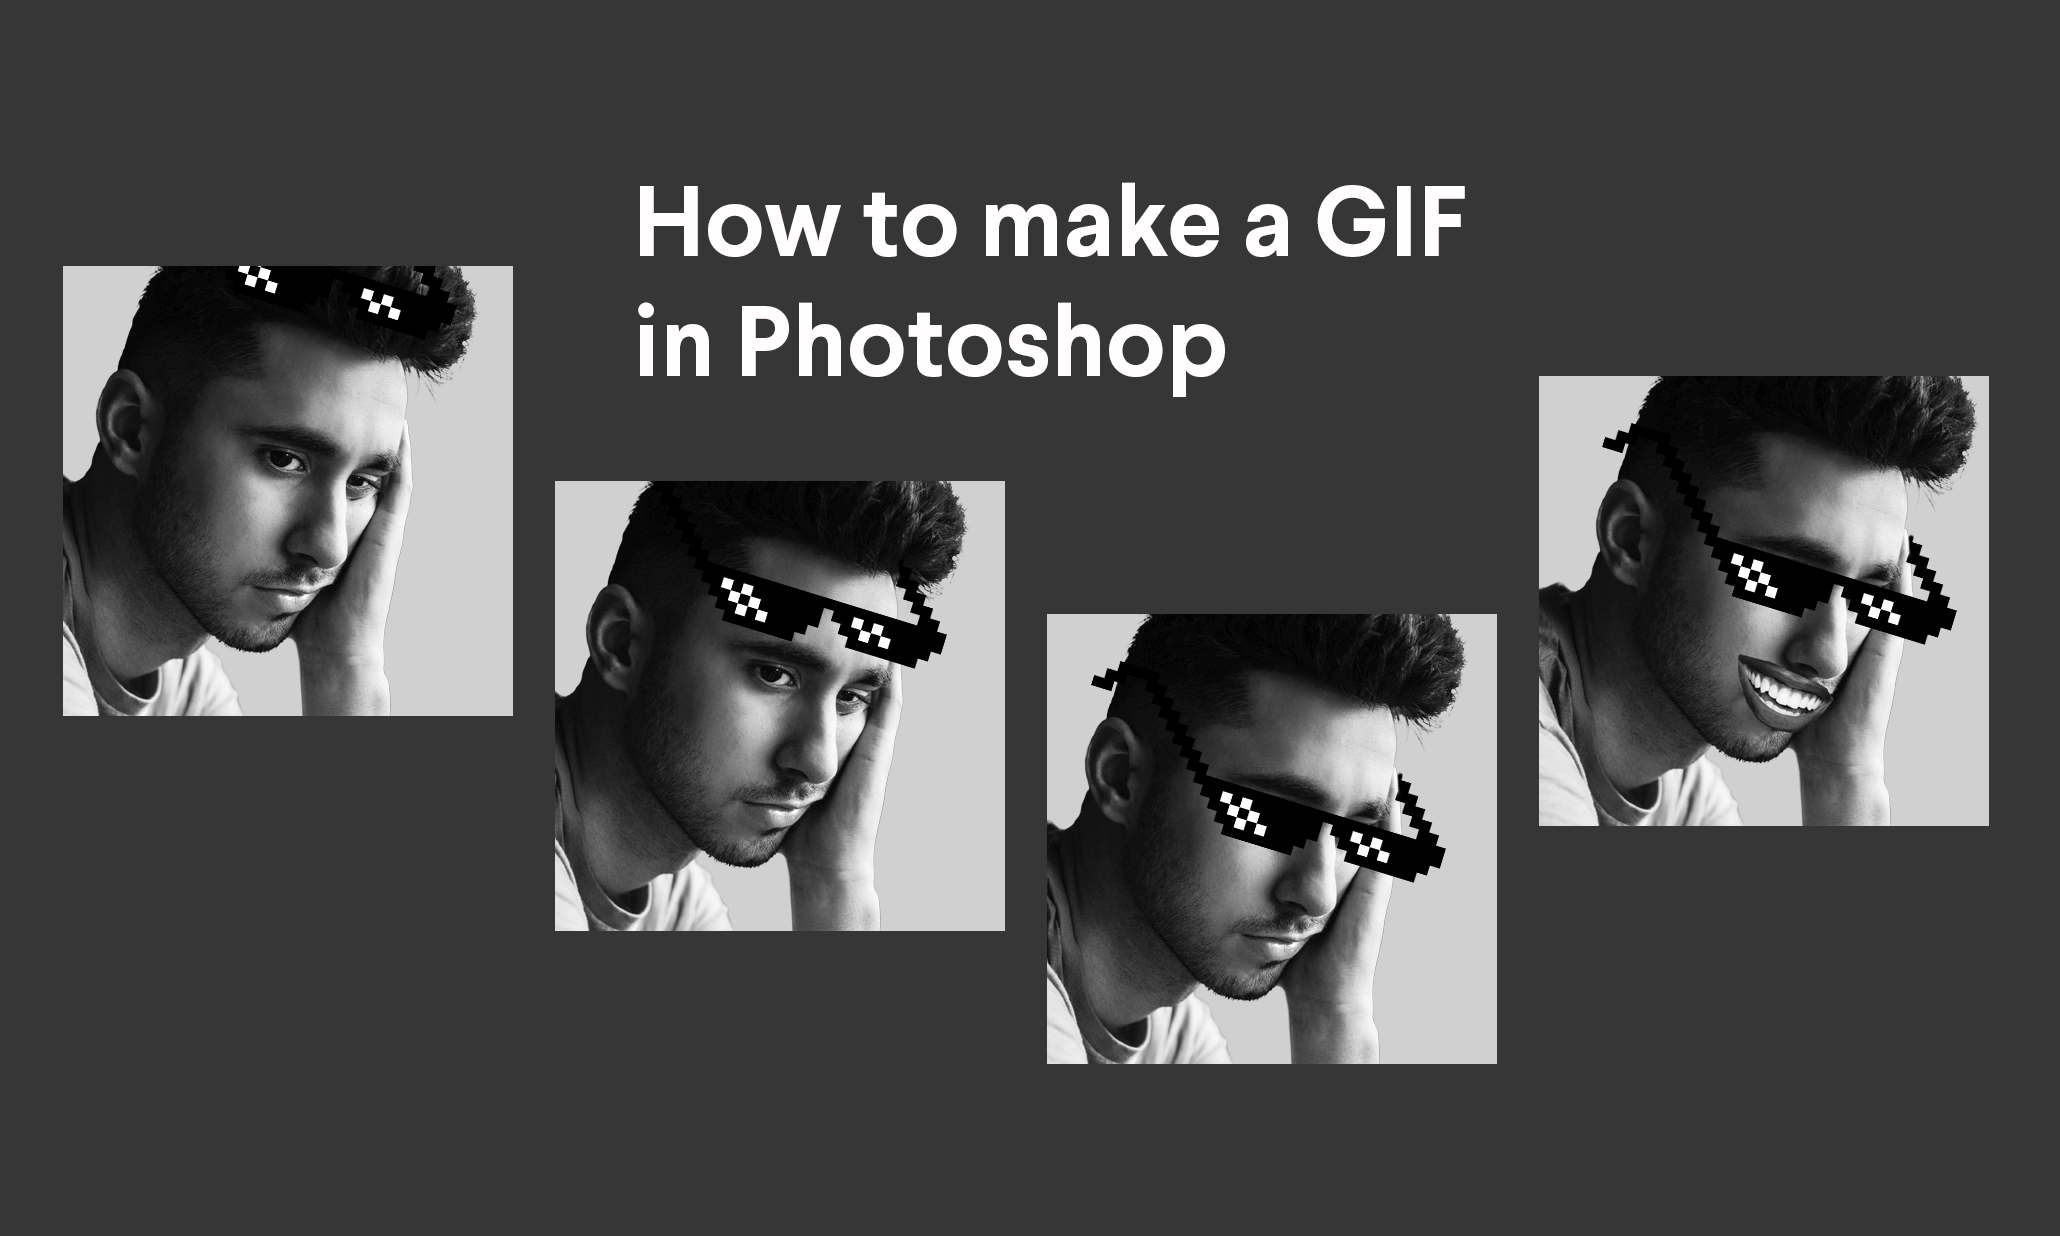 How to create a flashing animated GIF using Photoshop